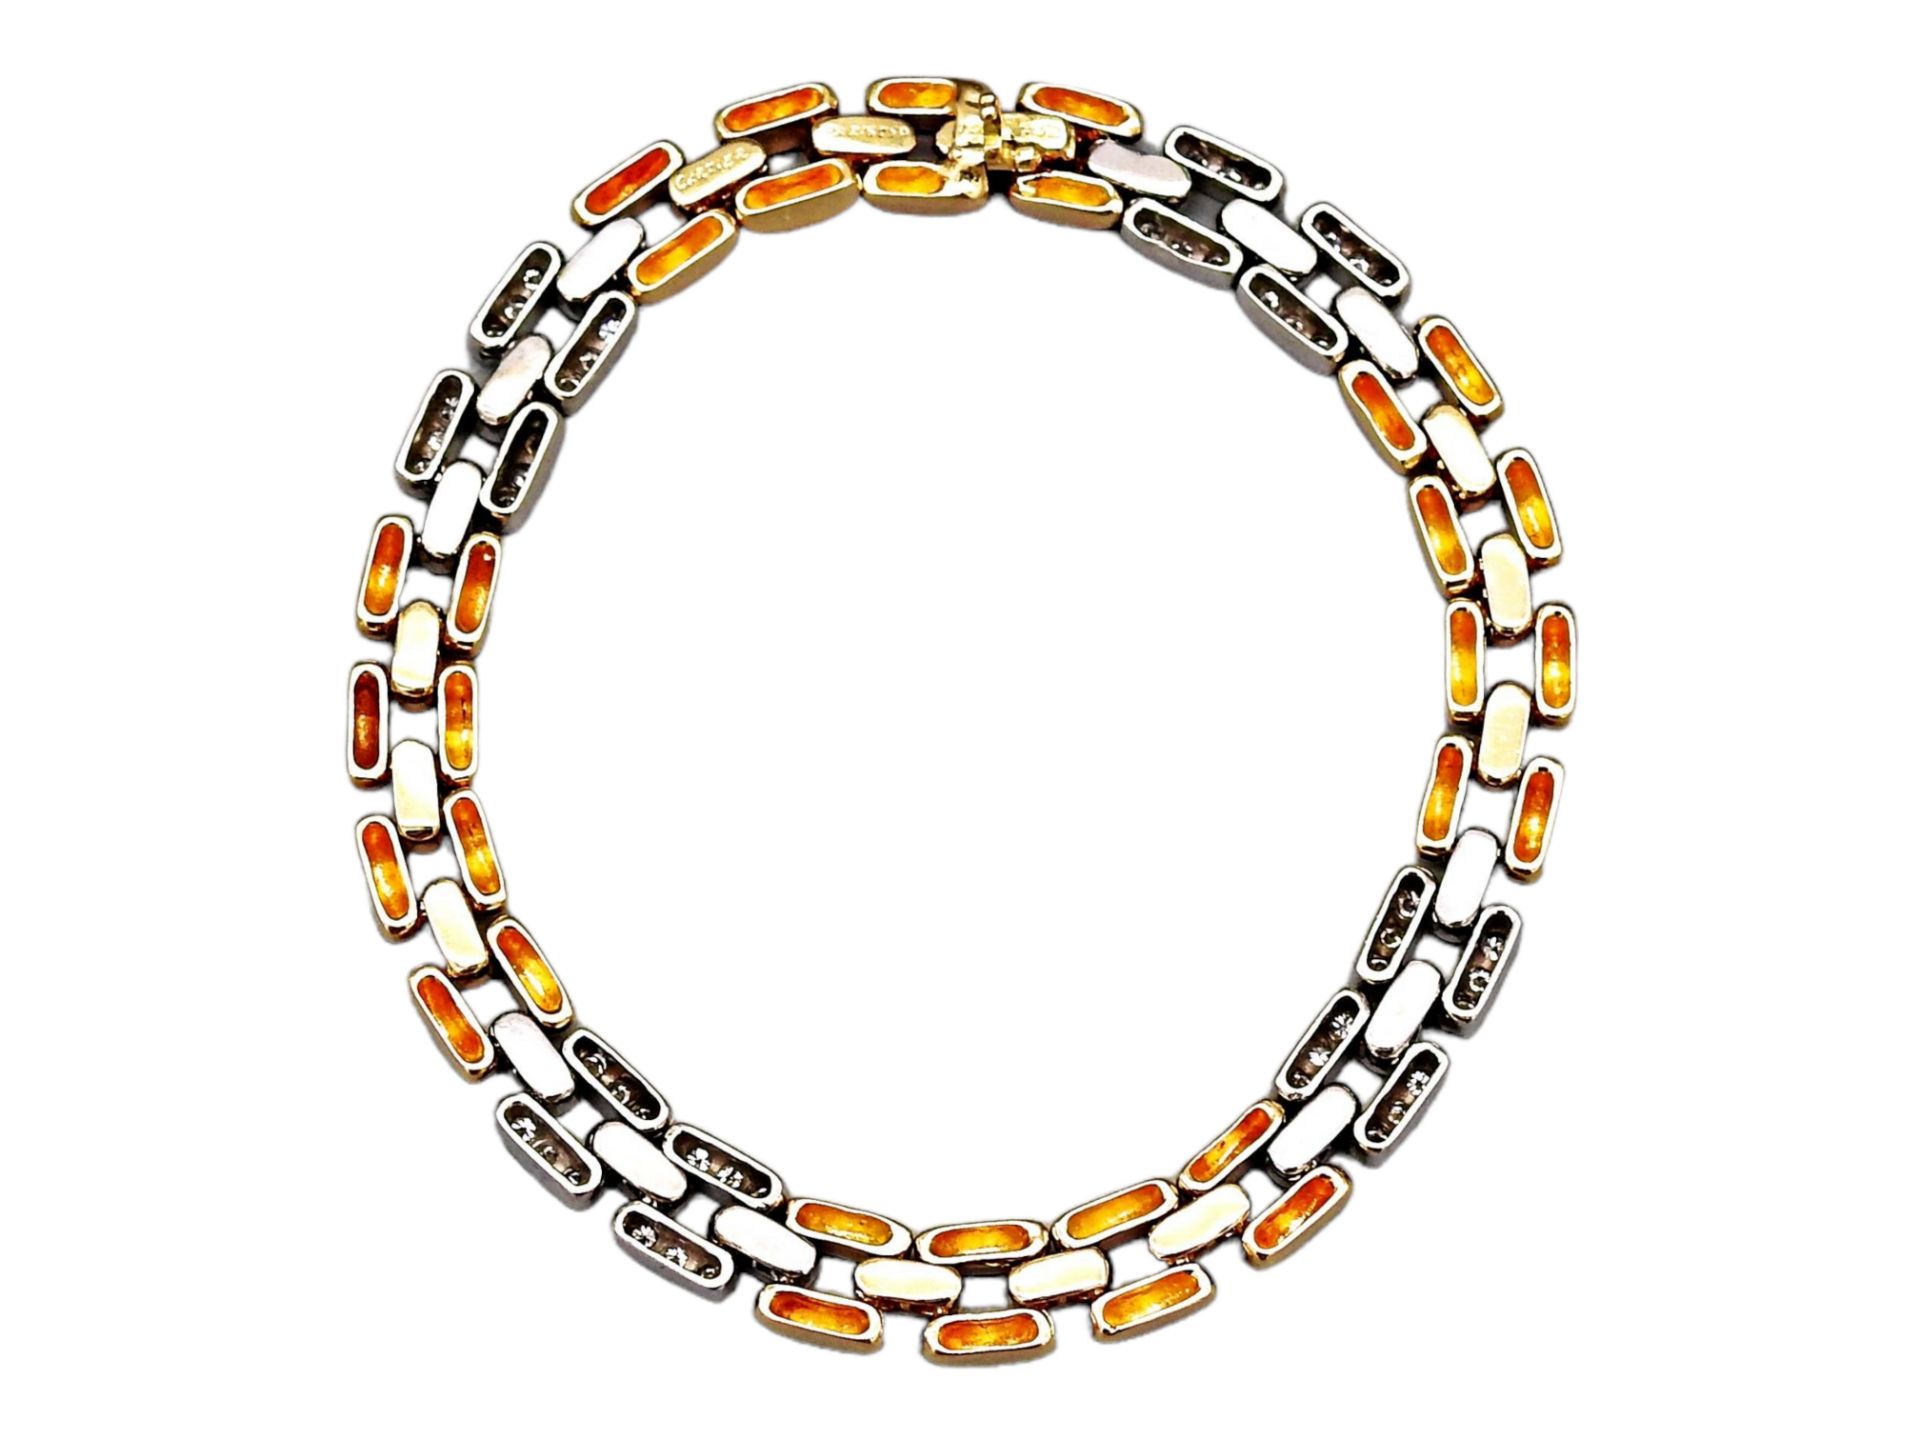 Cartier Armband in Bicolor - Image 5 of 5